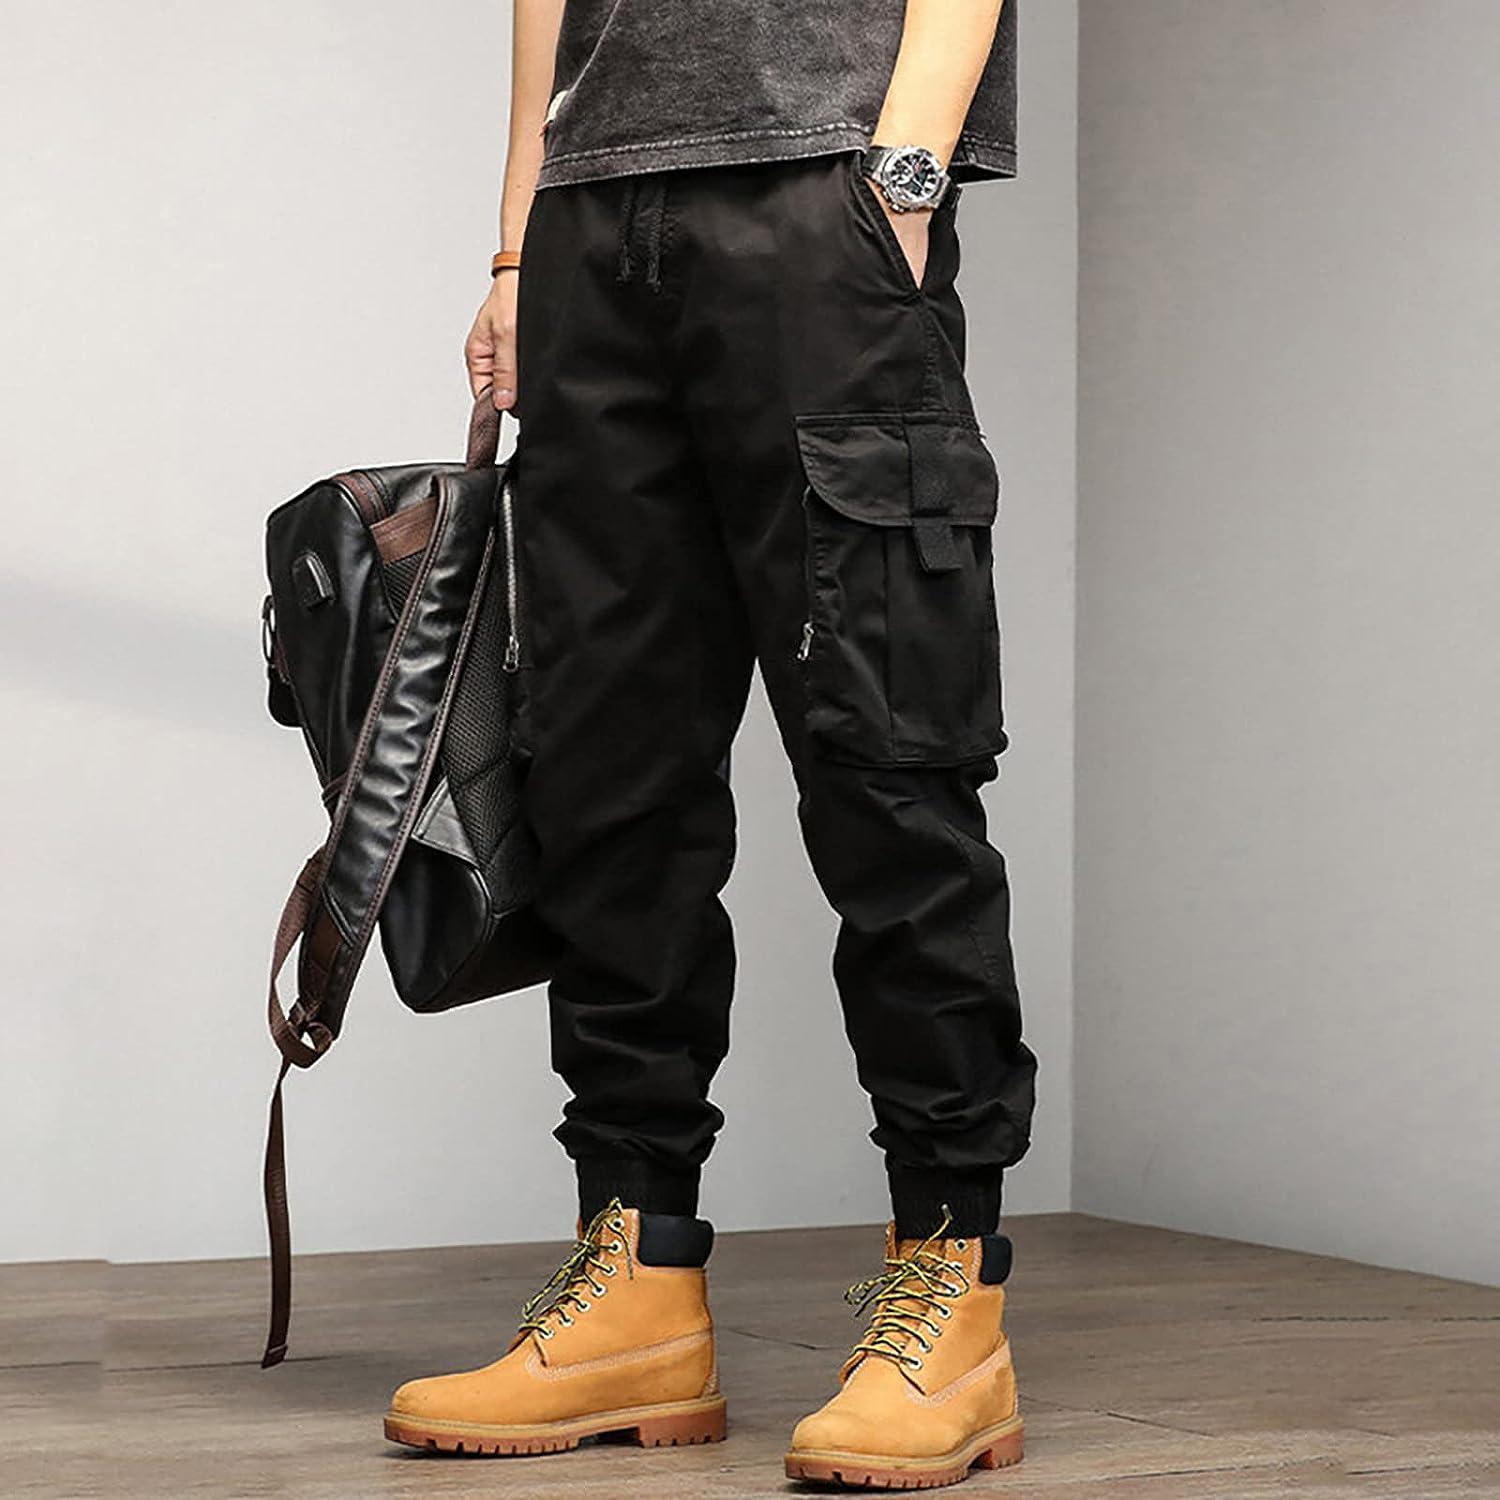  Cargo Pants for Men Relaxed Fit Causal Slim Beach Work  Streetwear Khaki Baggy Pants with Zipper Pockets Drawstring Sweatpants :  Clothing, Shoes & Jewelry